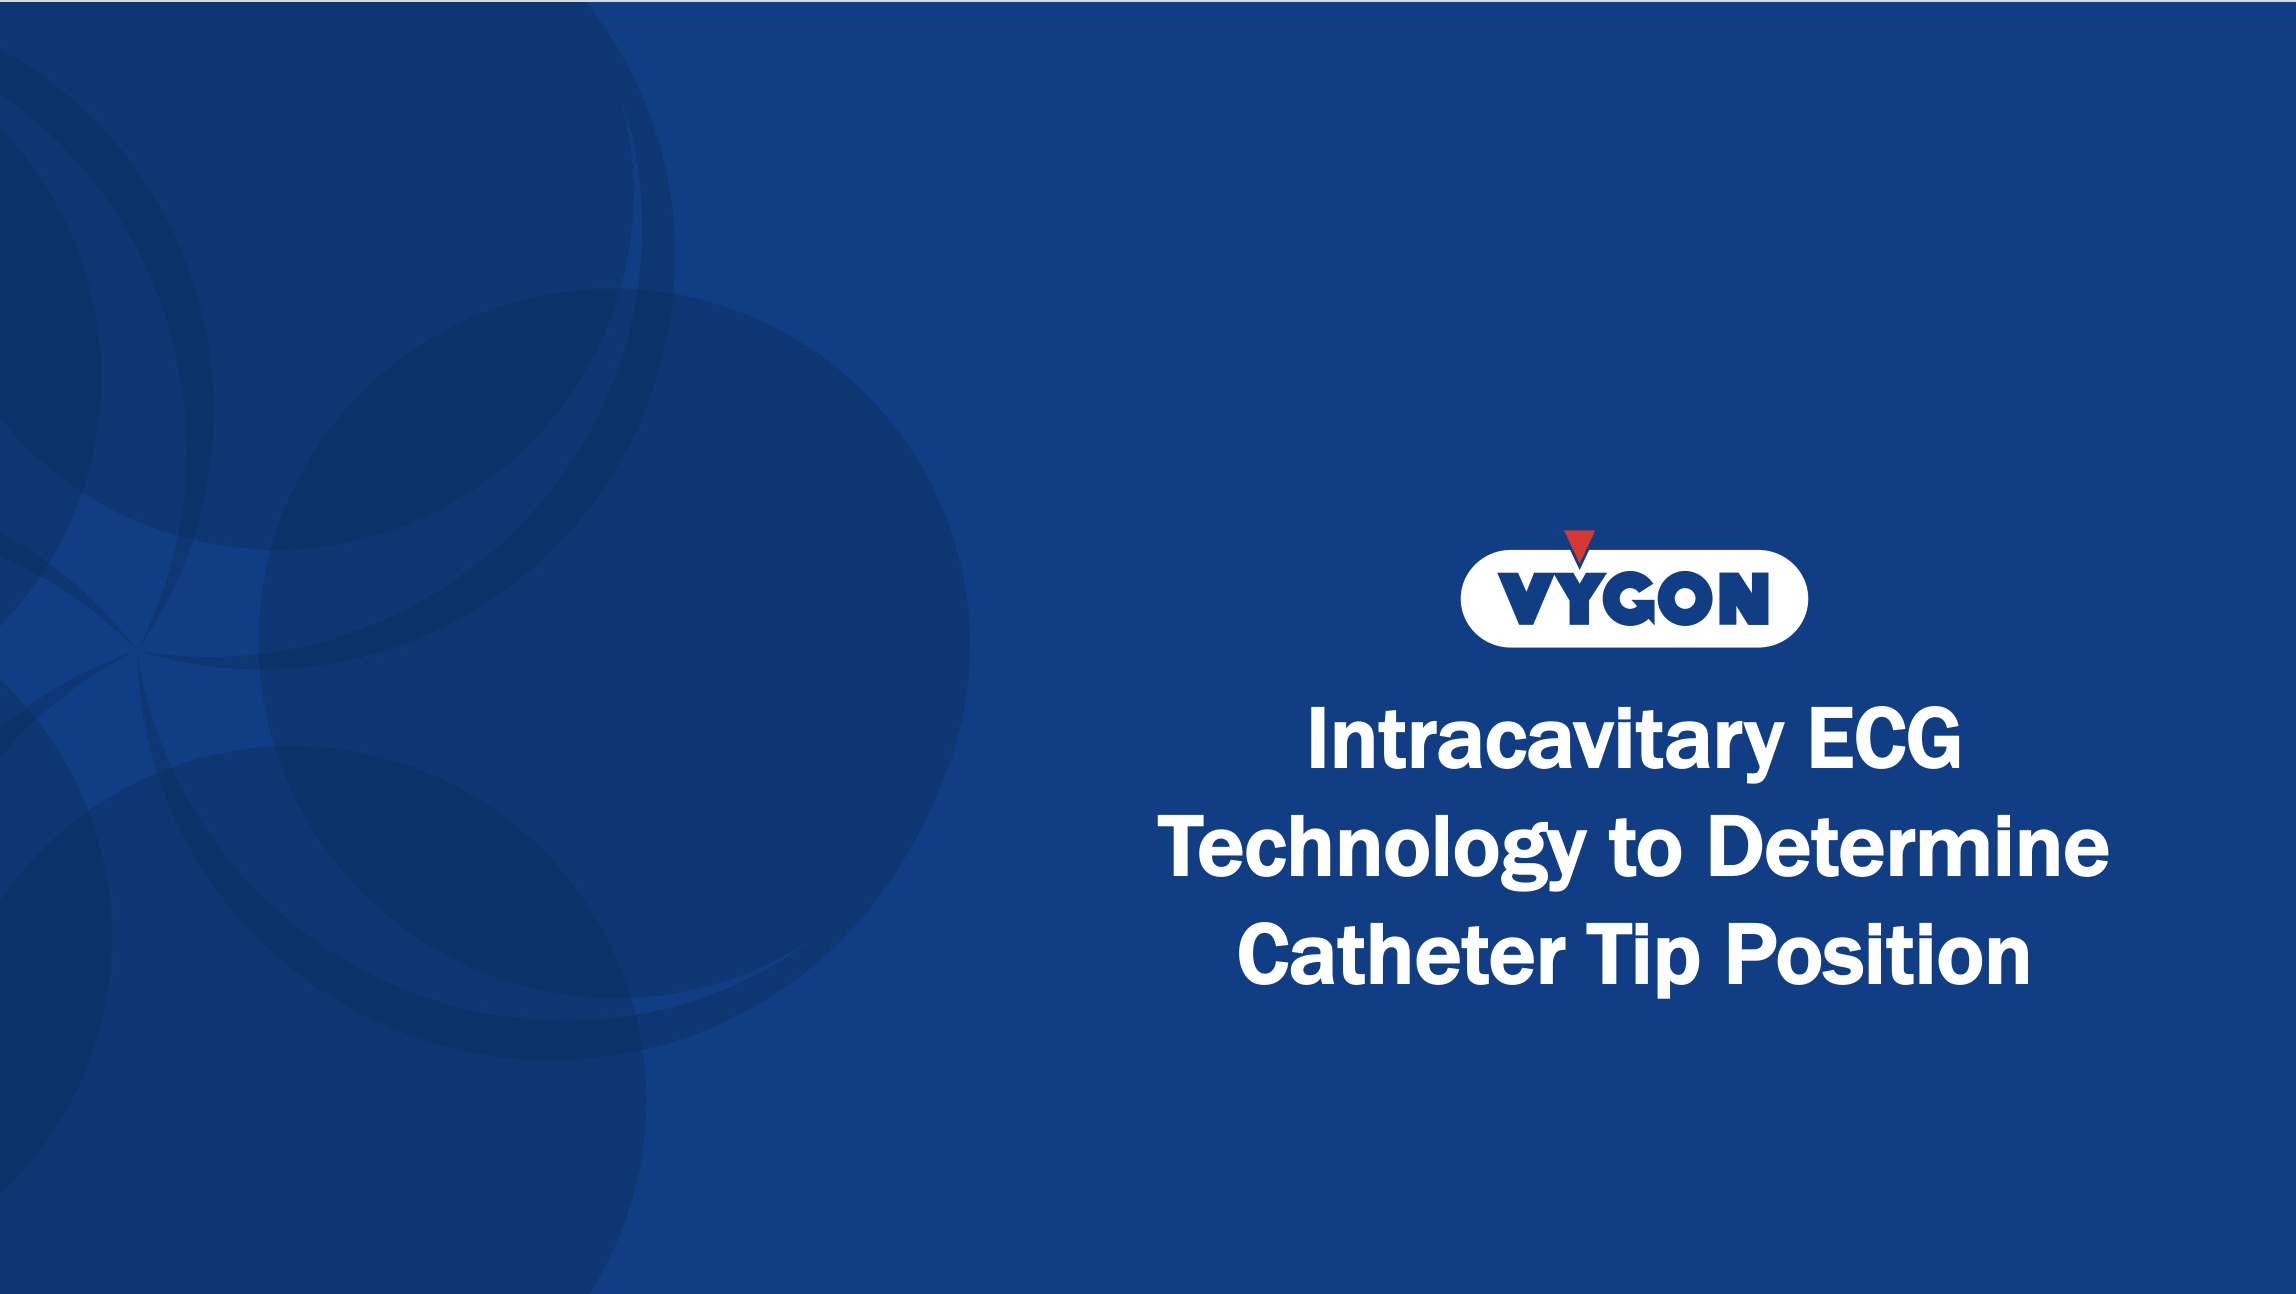 Intracavitary ECG Technology to Determine Catheter Tip Position